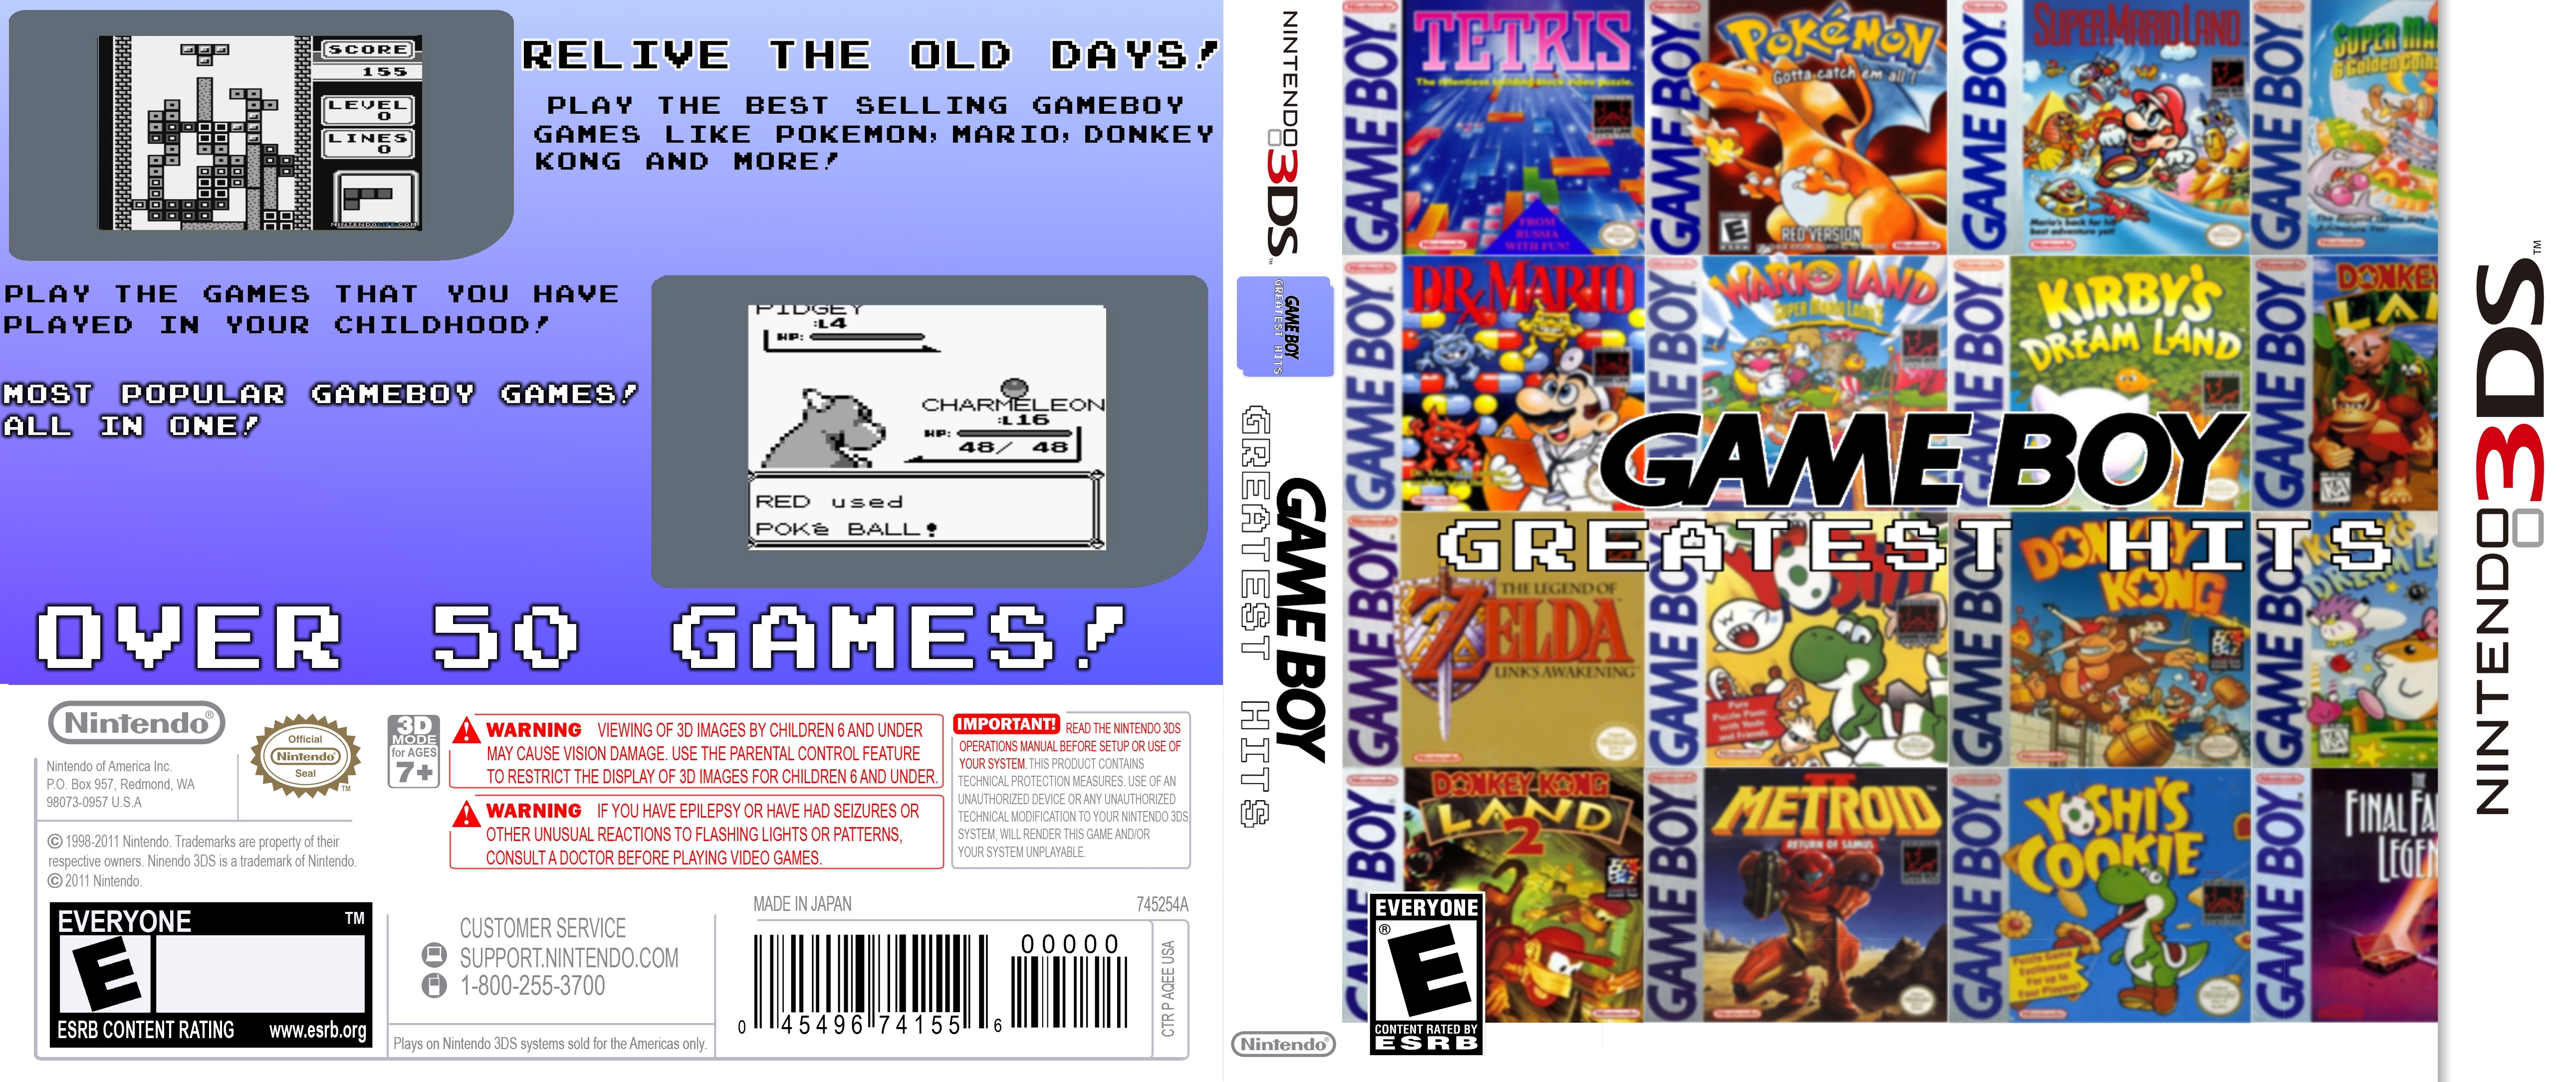 Game Boy : Greatest Hits box cover